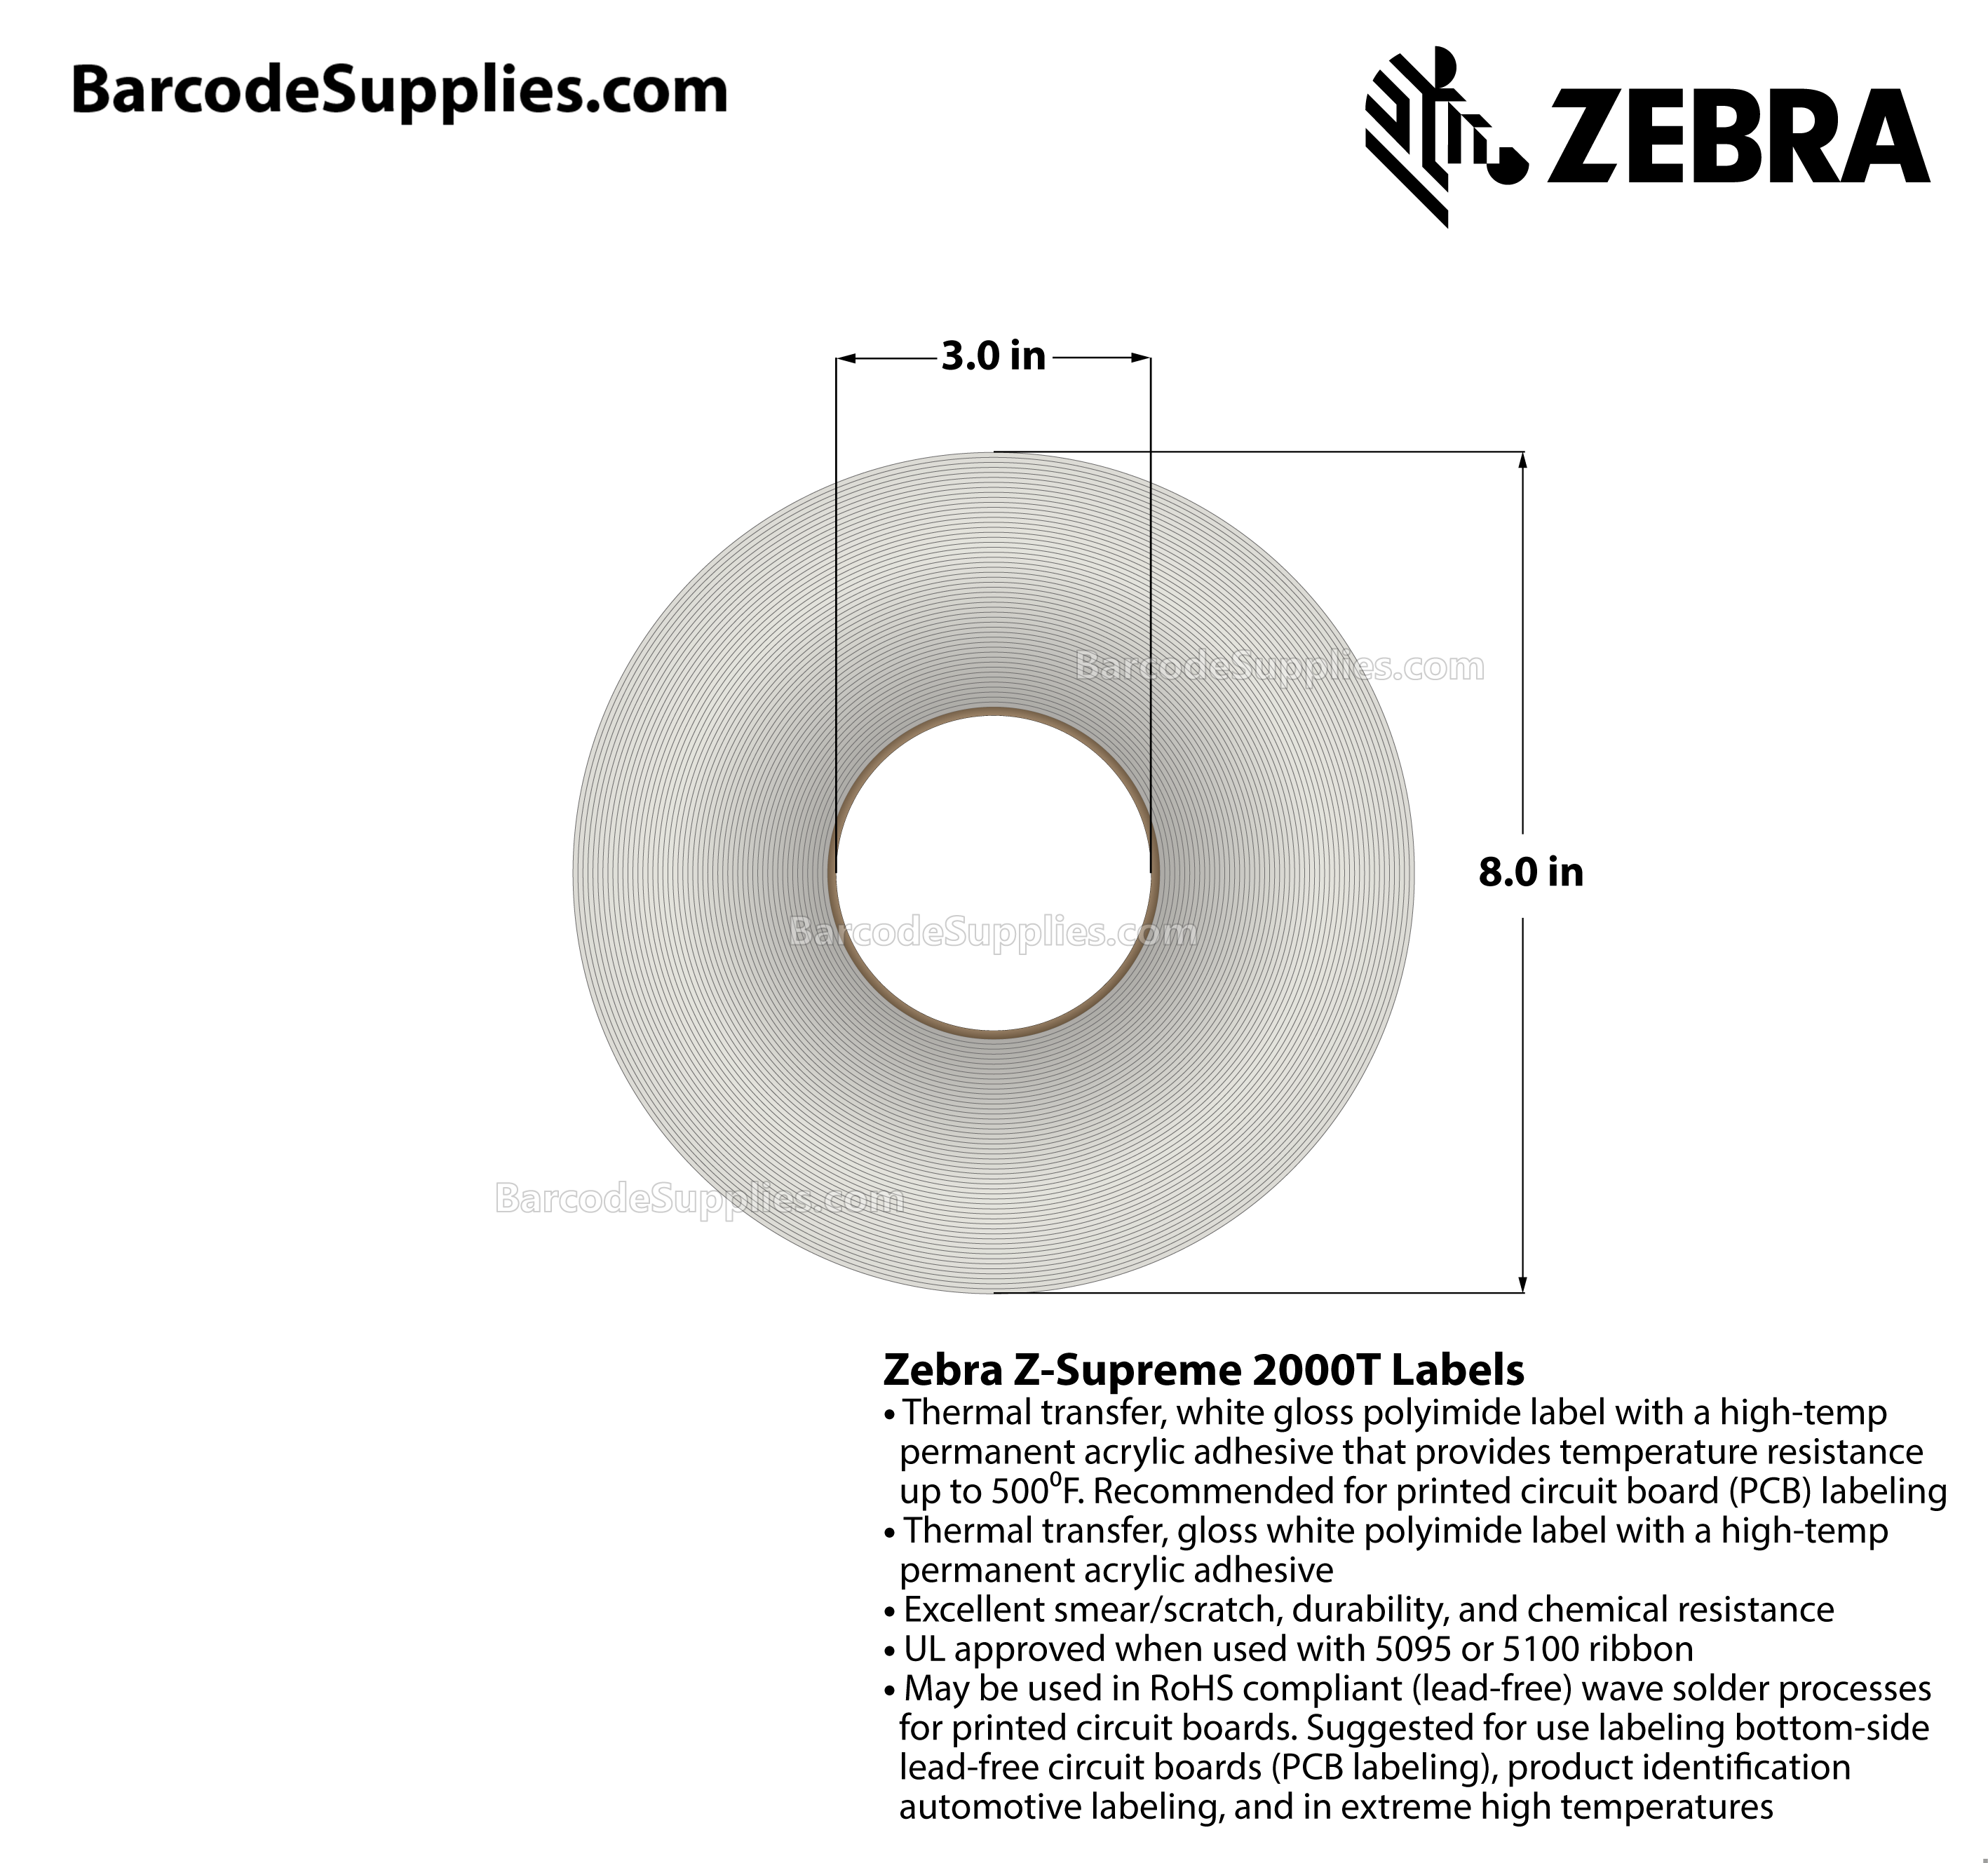 0.25 x 0.25 Thermal Transfer White Z-Supreme 2000T White (7-Across) Labels With High-temp Adhesive - Perforated - 10003 Labels Per Roll - Carton Of 1 Rolls - 10003 Labels Total - MPN: 10015787